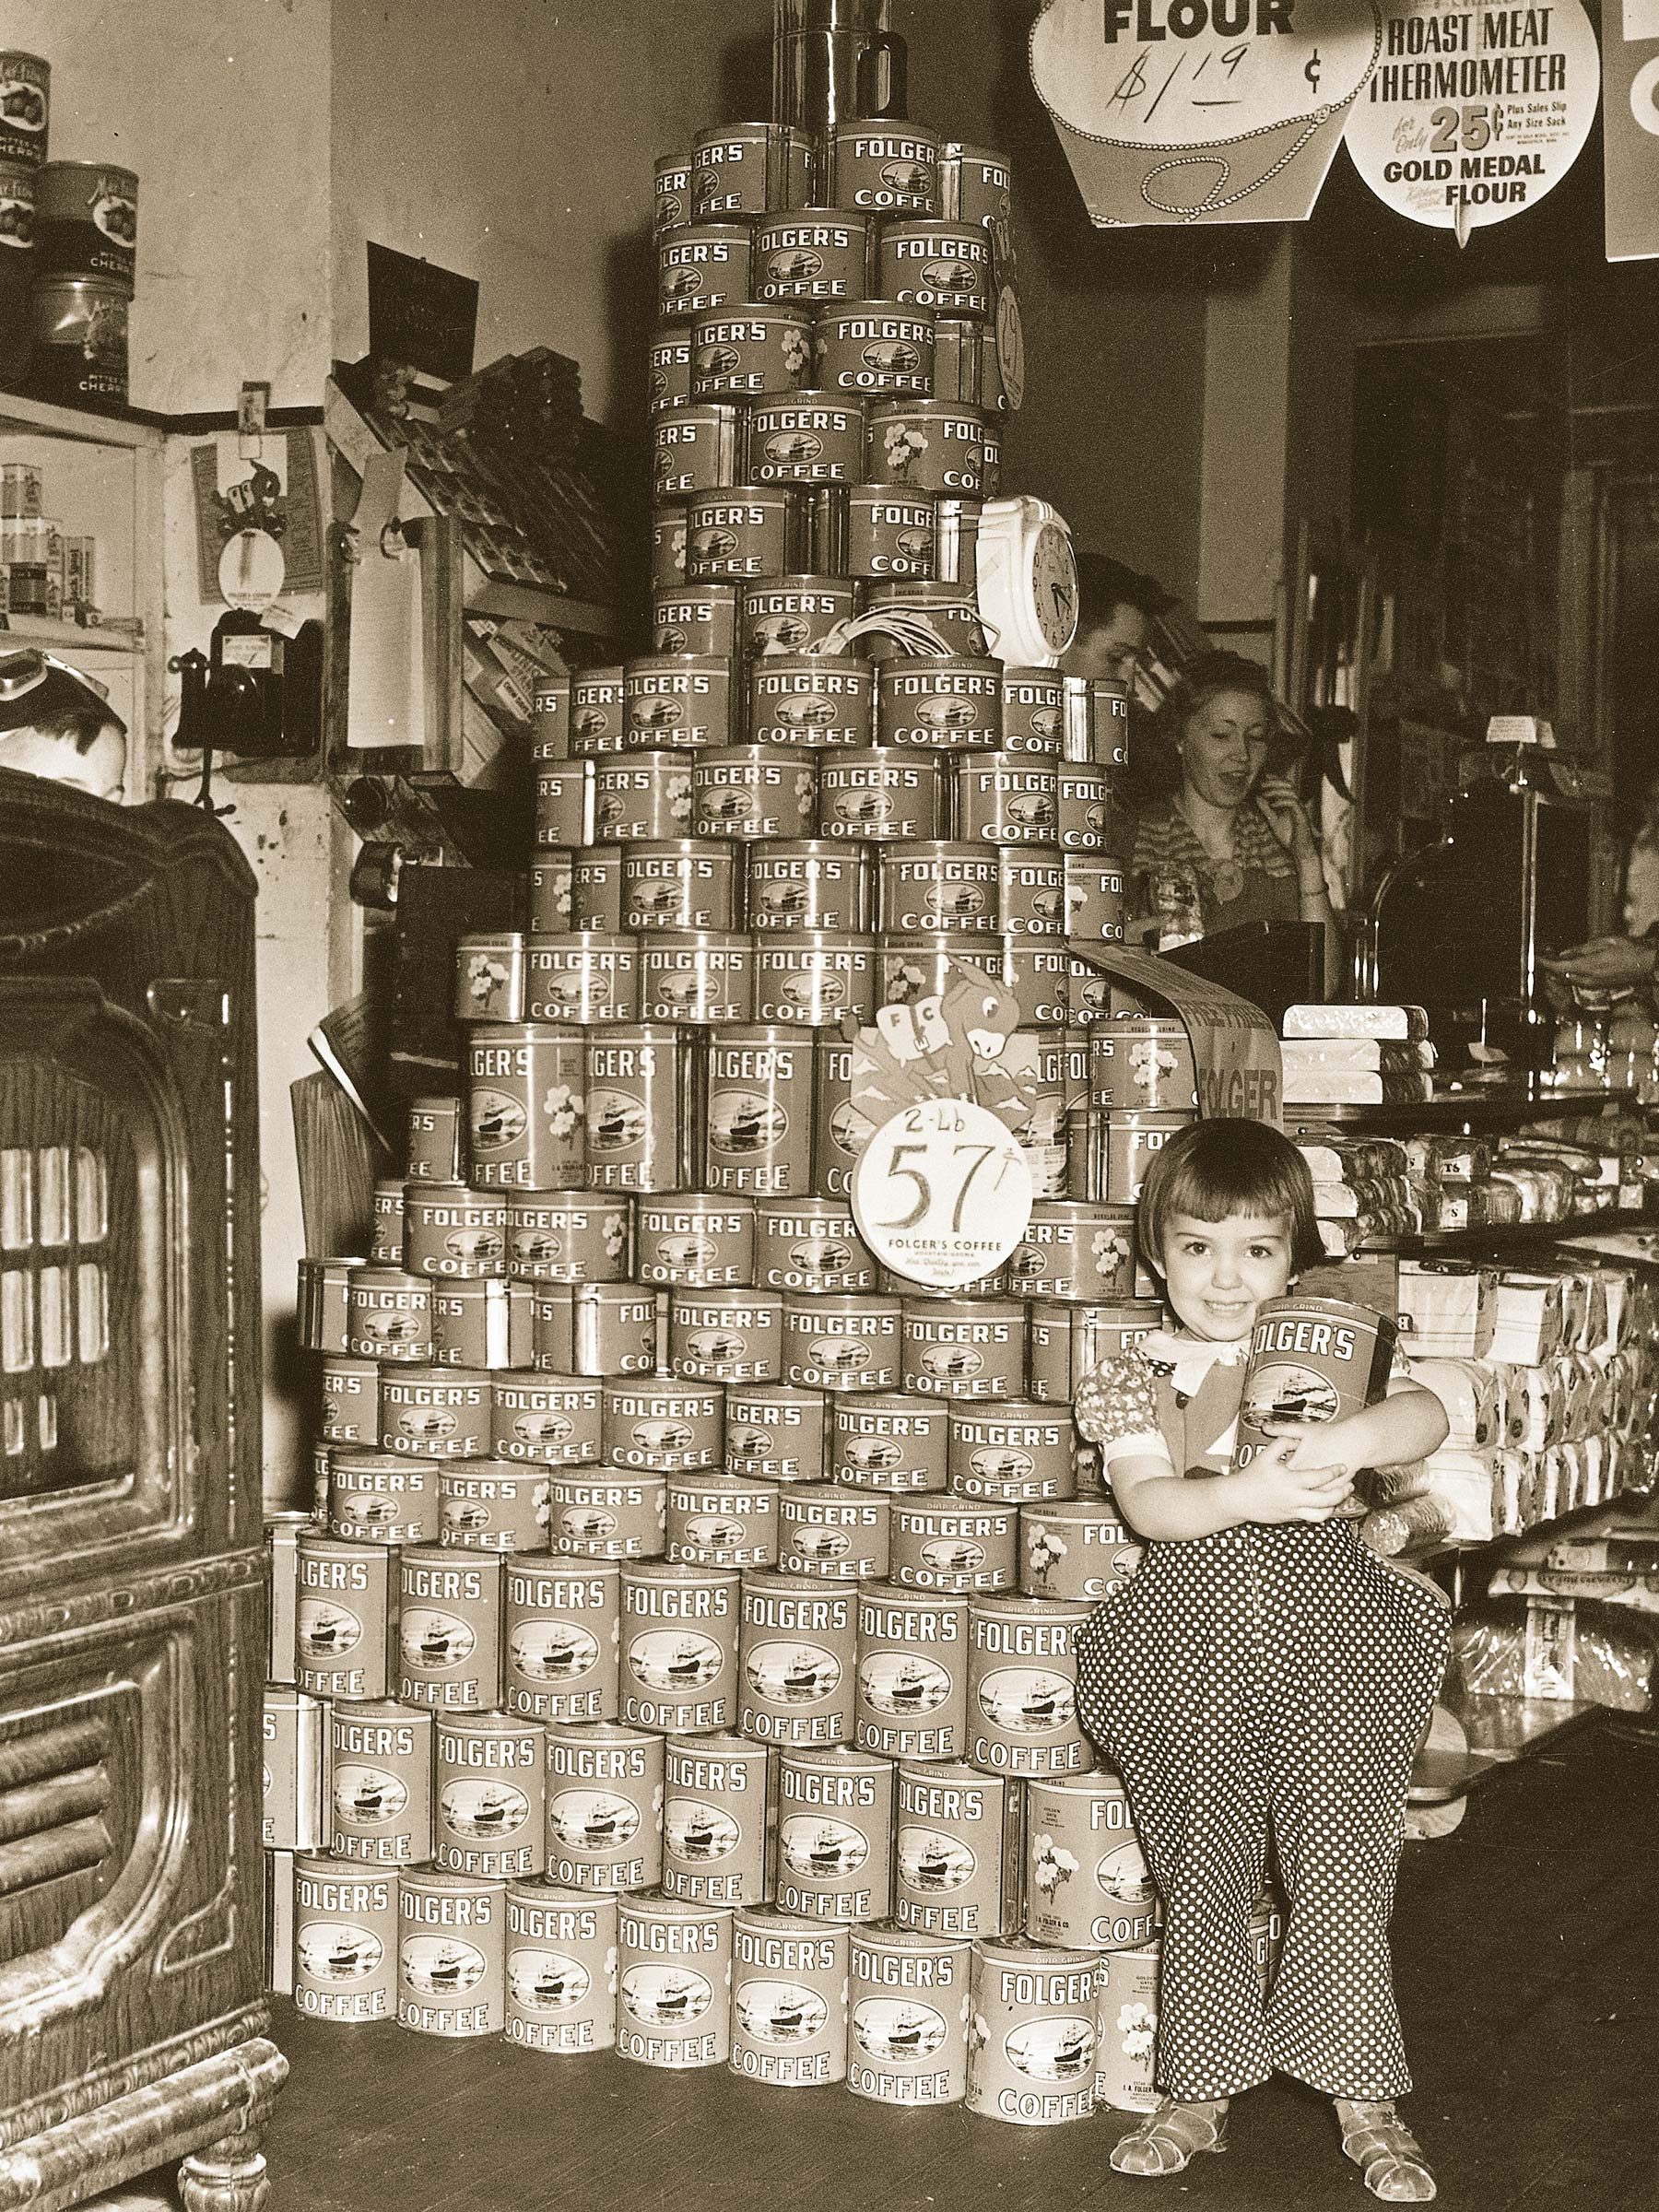 What Food Shopping Looked Like 100 Years Ago | Reader's Digest